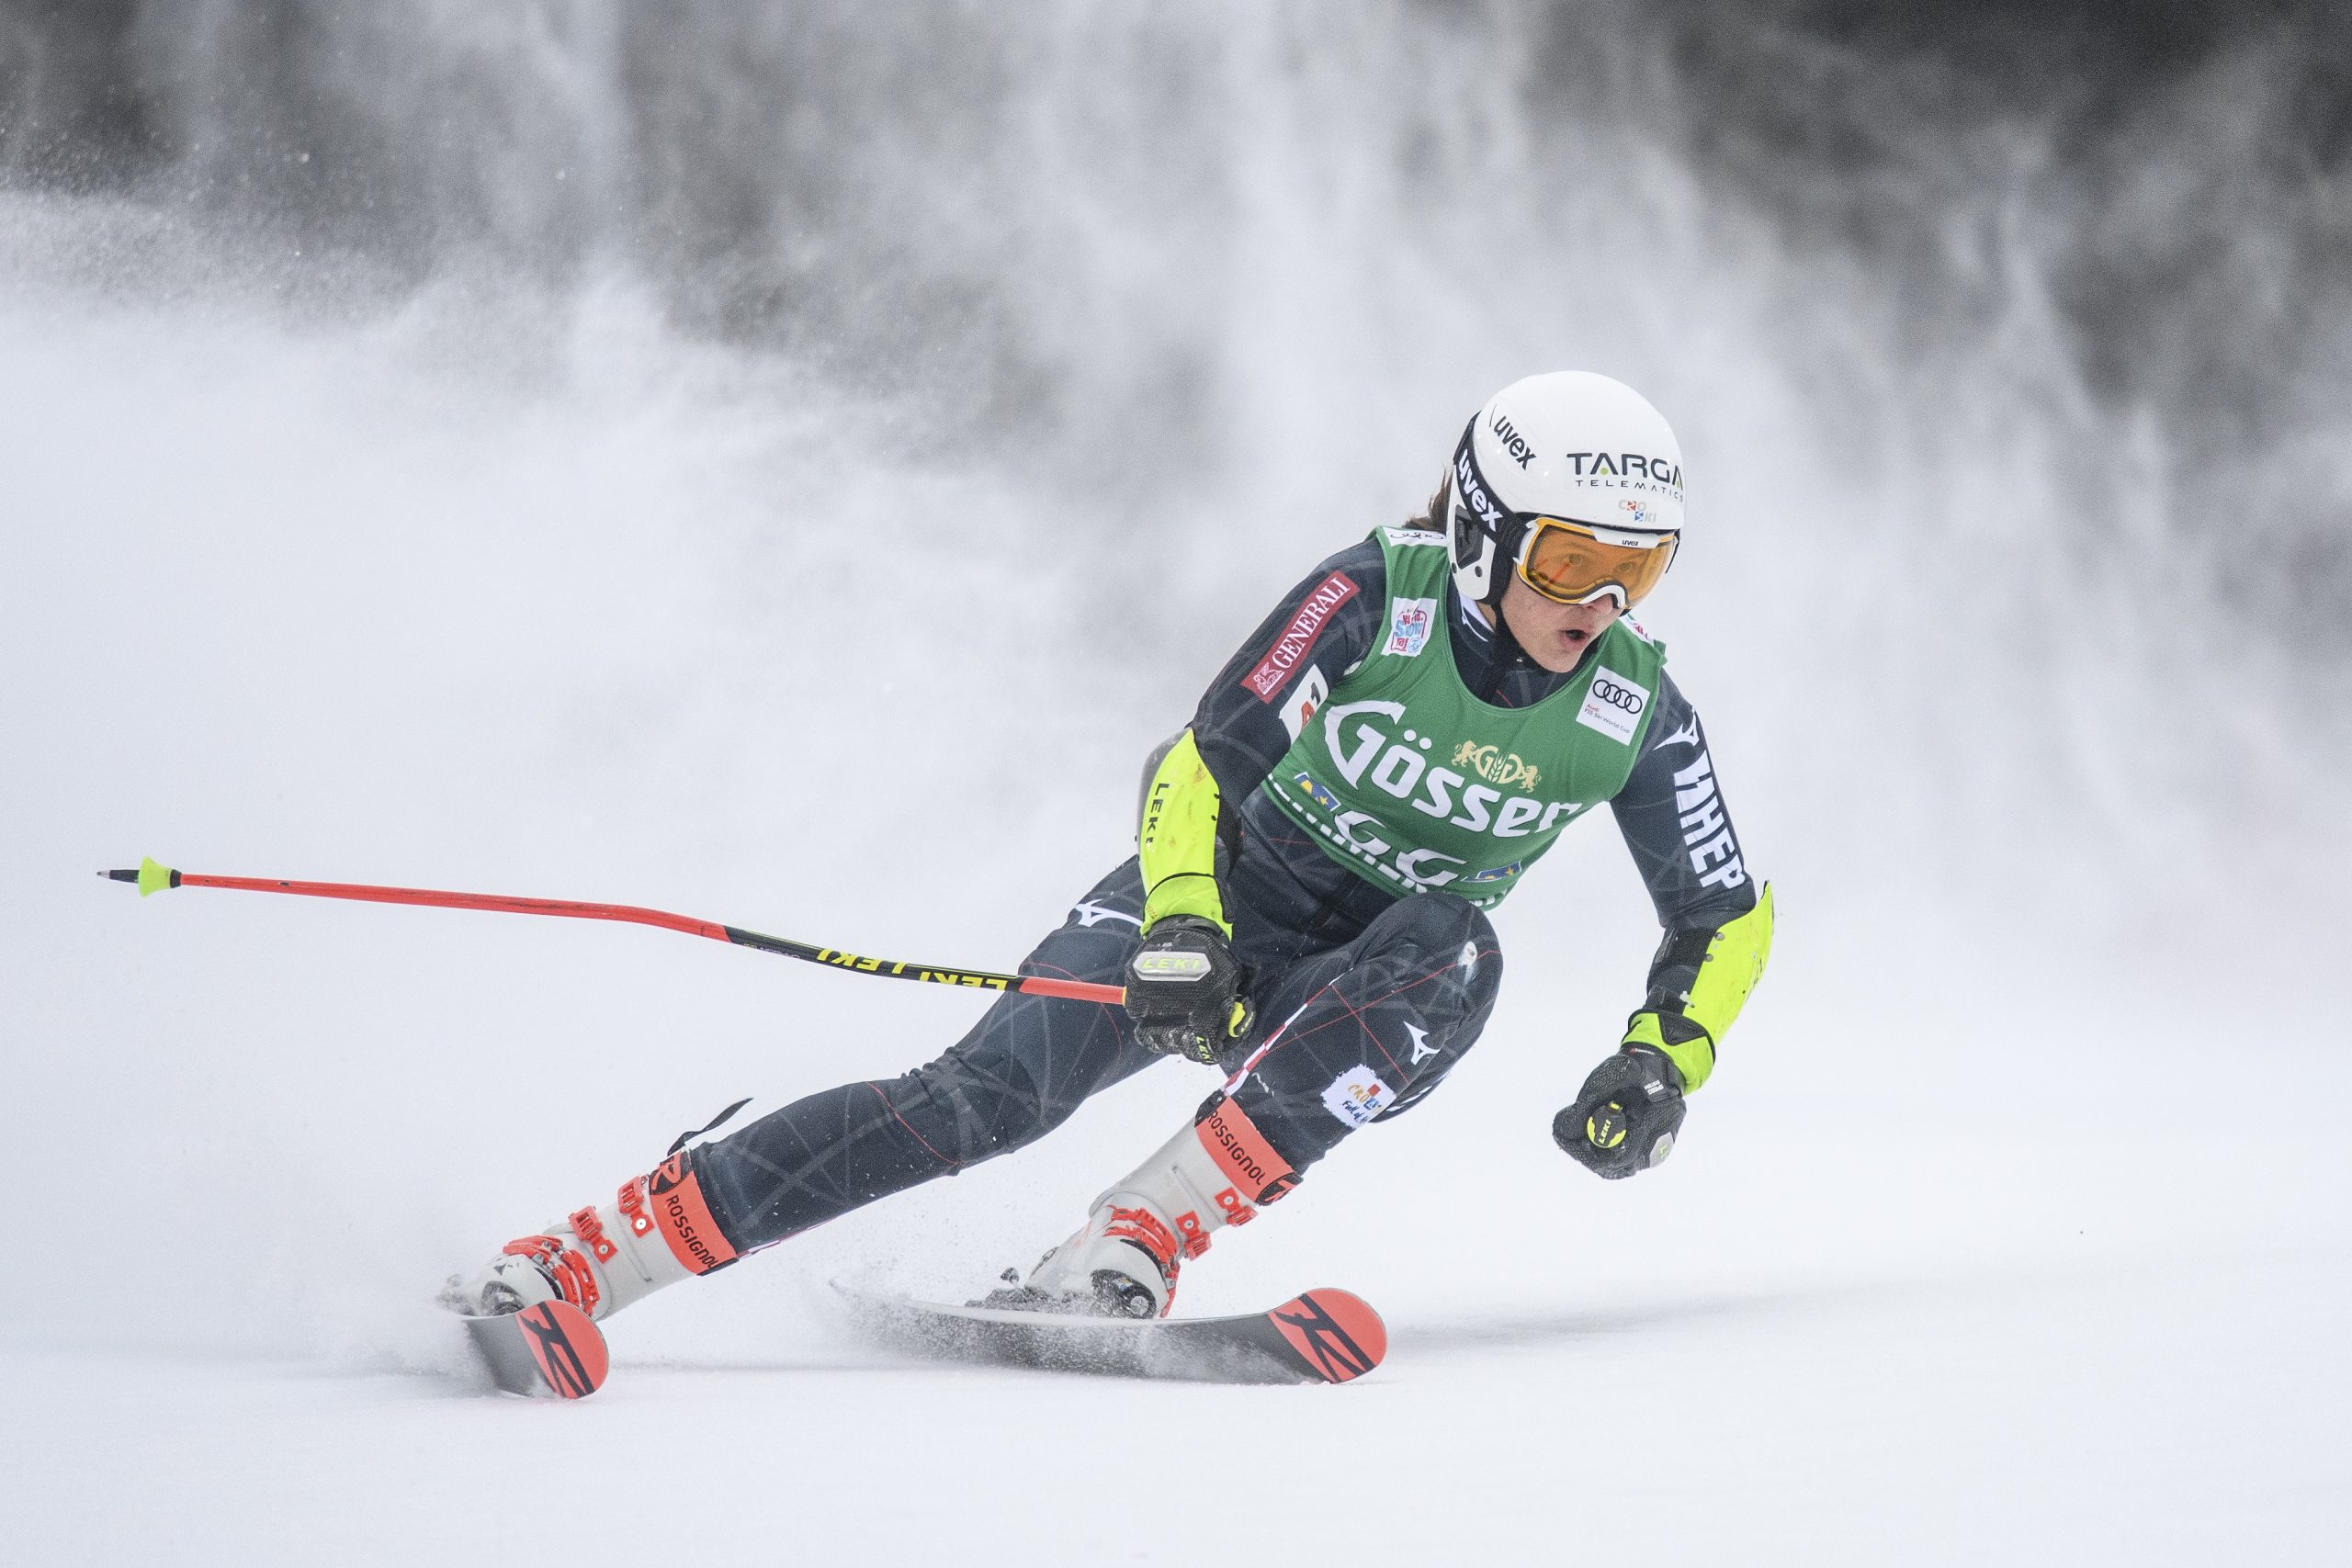 epa08907512 Zrinka Ljutic of Croatia in action during the first run of the Women's Giant Slalom race at the FIS Alpine Skiing World Cup in Semmering, Austria, 28 December 2020.  EPA/CHRISTIAN BRUNA